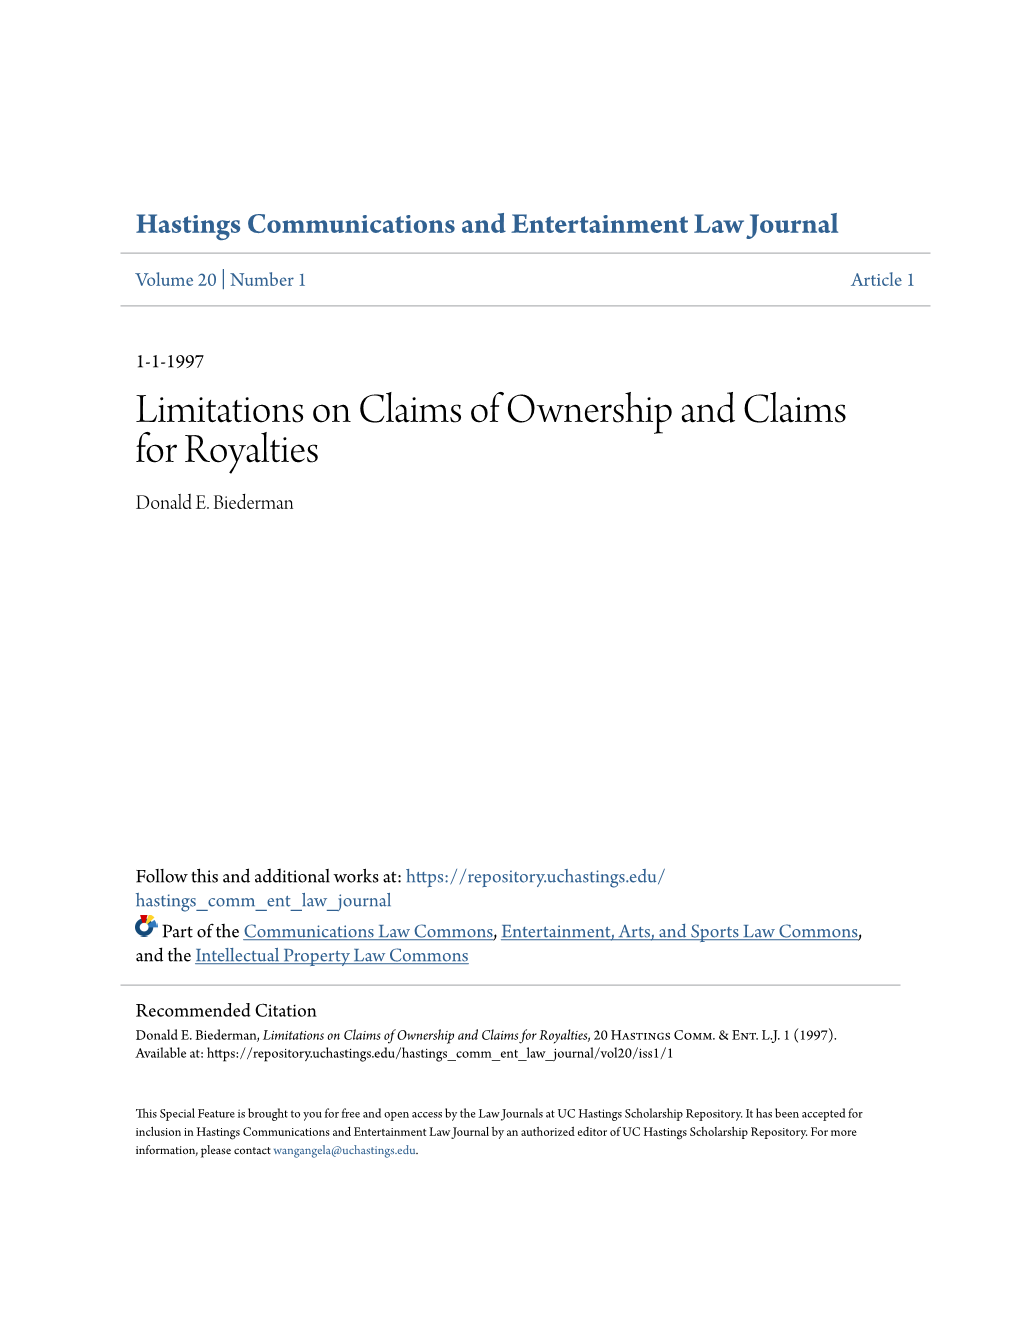 Limitations on Claims of Ownership and Claims for Royalties Donald E